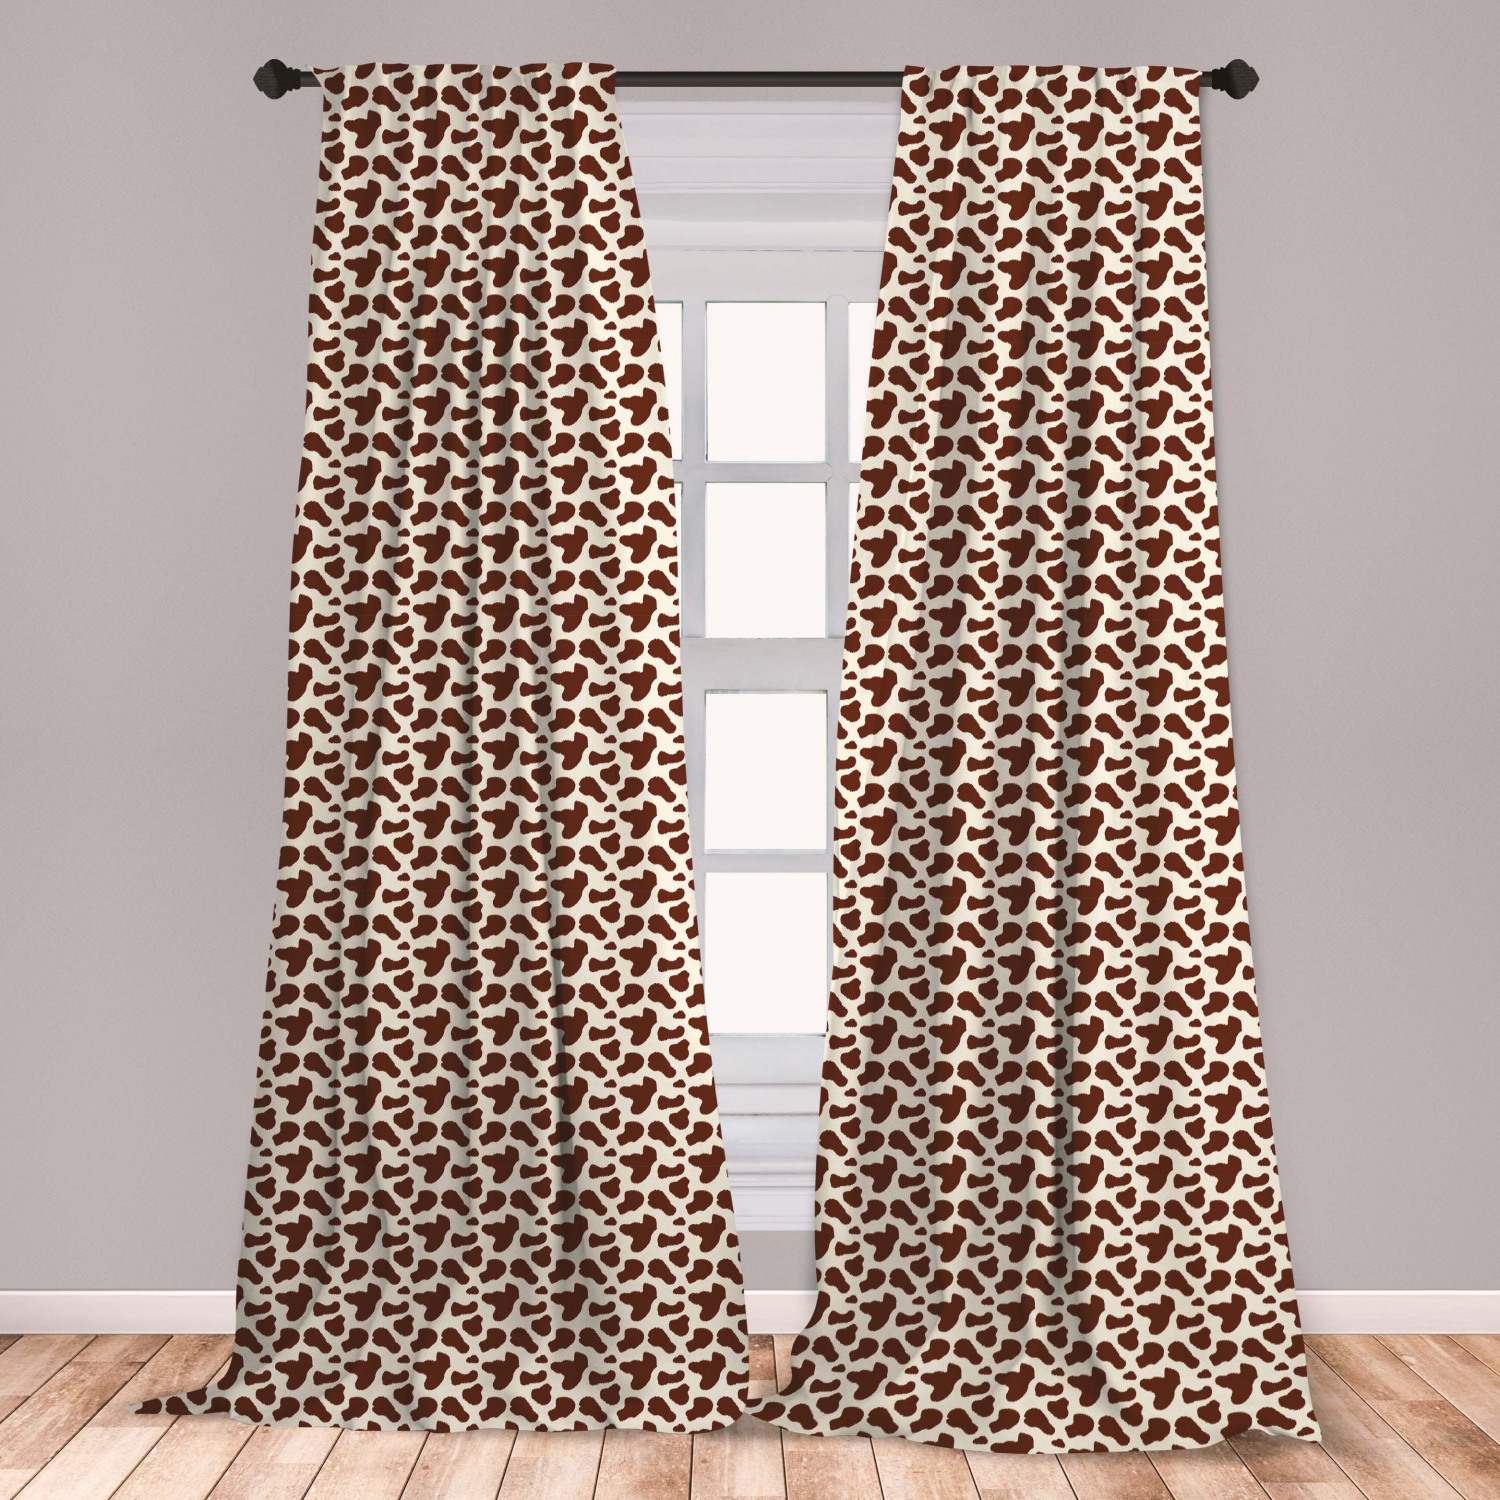 Cow Print Curtains 2 Panels Set, Cattle Skin with Brown Spots ...